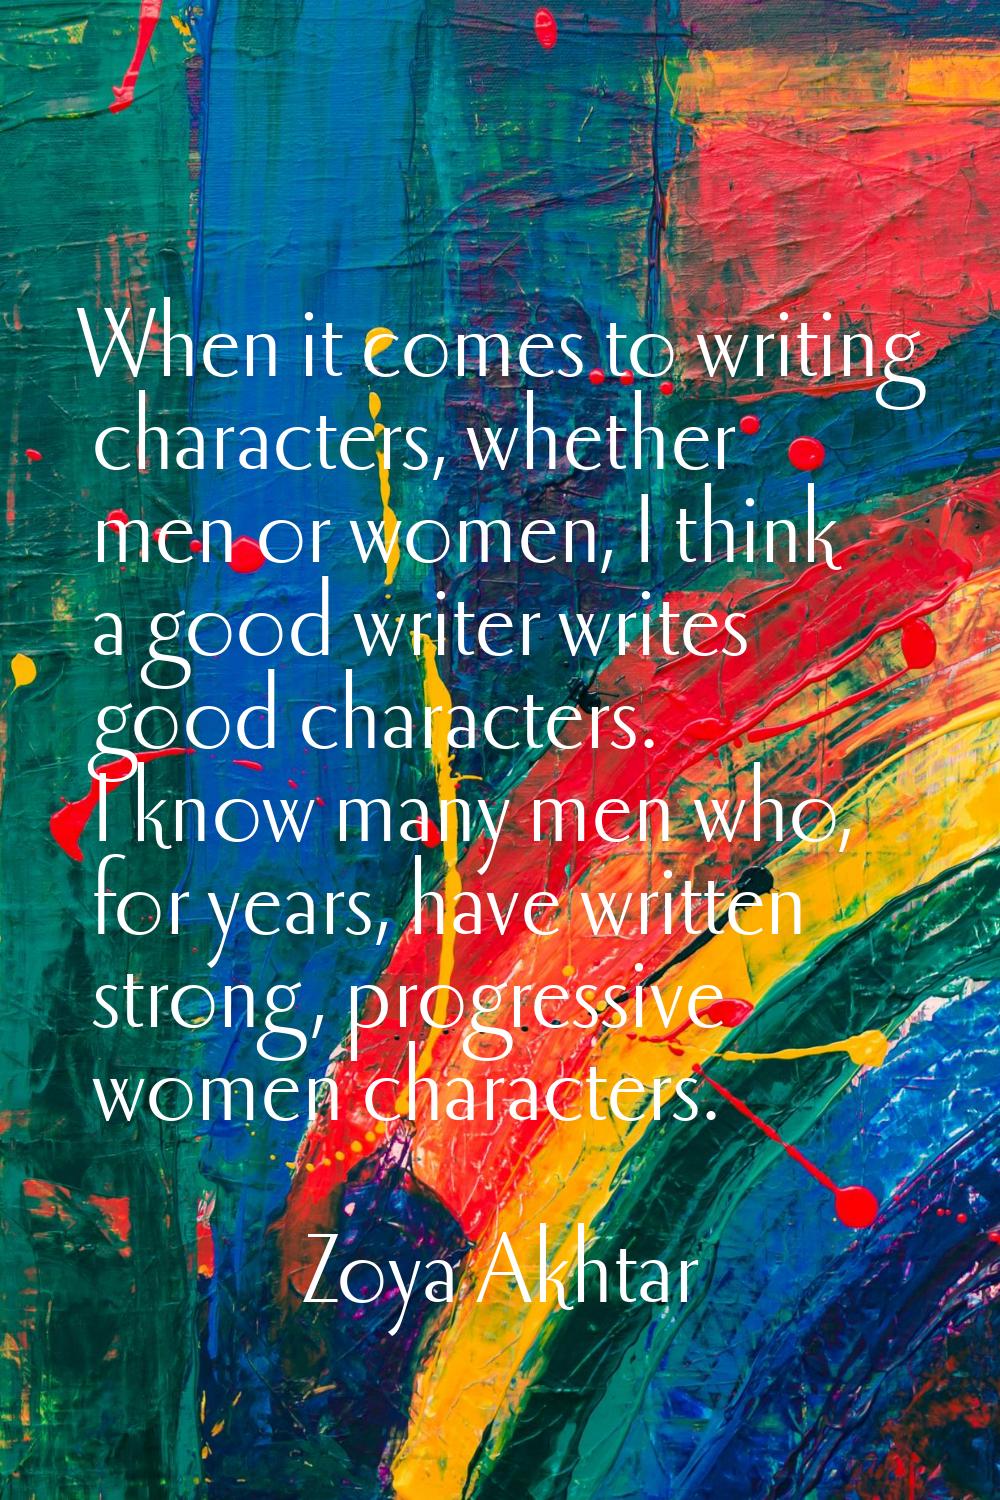 When it comes to writing characters, whether men or women, I think a good writer writes good charac